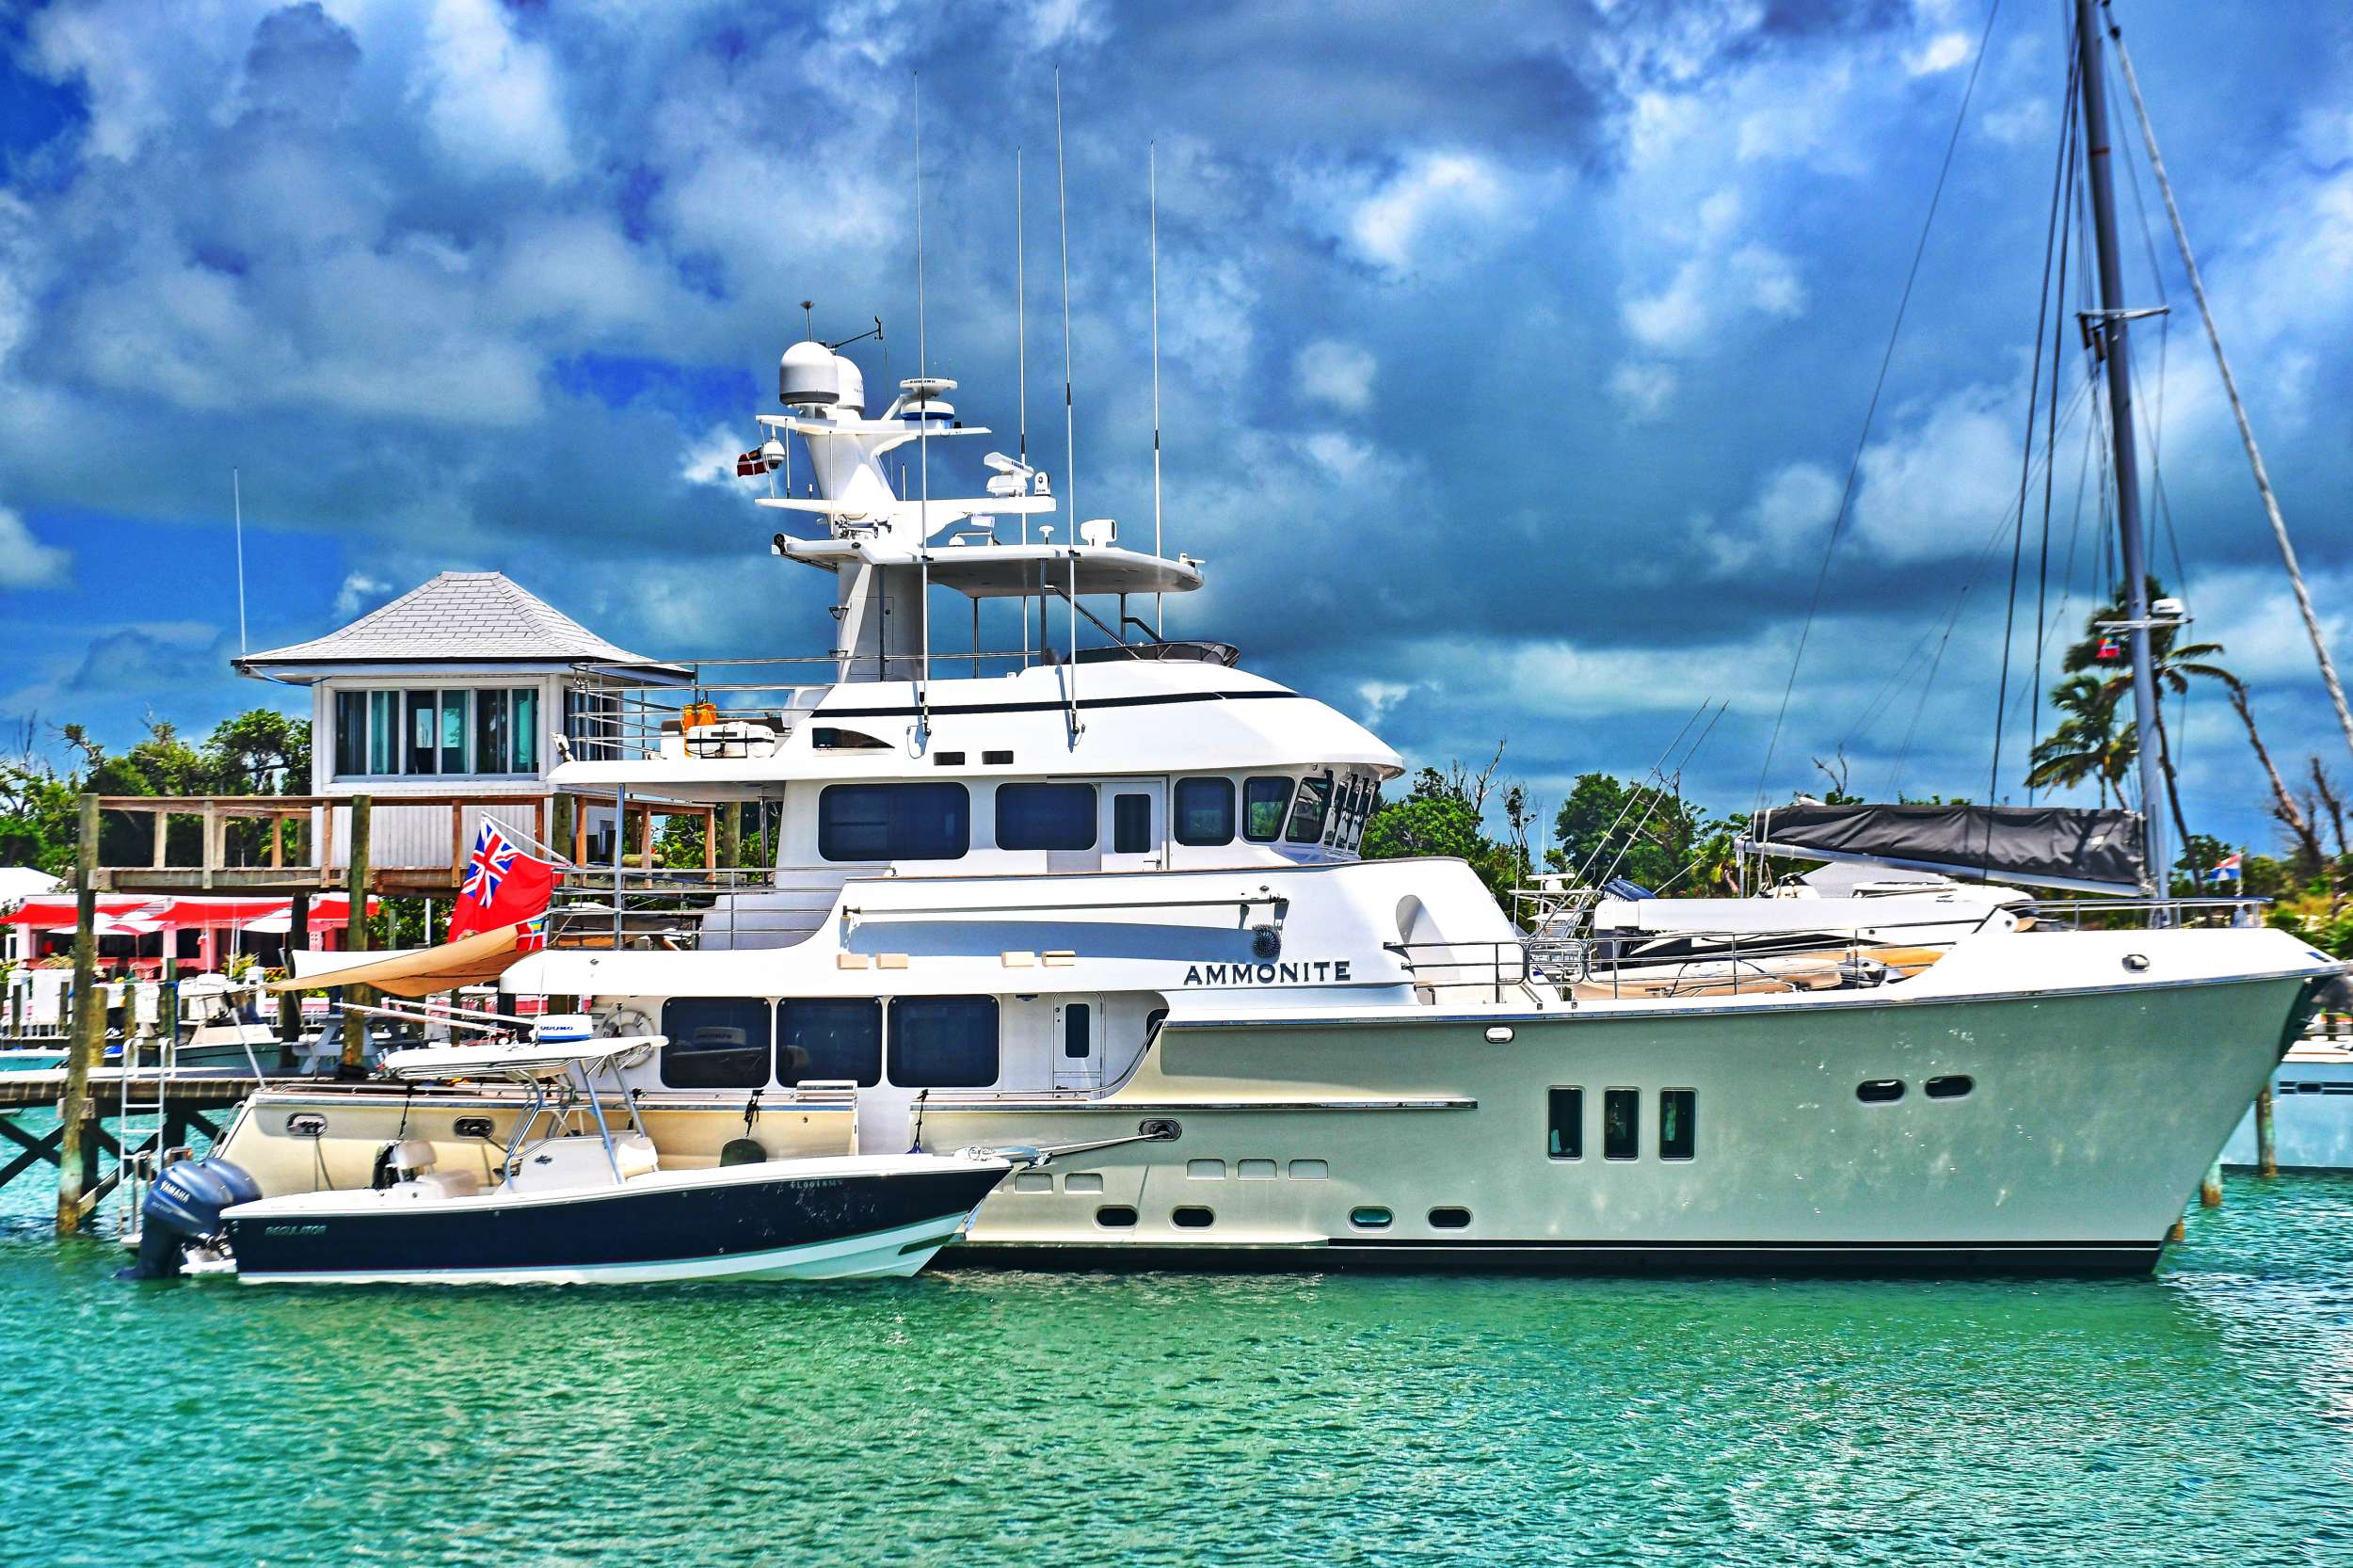 Ammonite is a 78´ Nordhavn with a charter base in Marsh Harbour, Abaco.